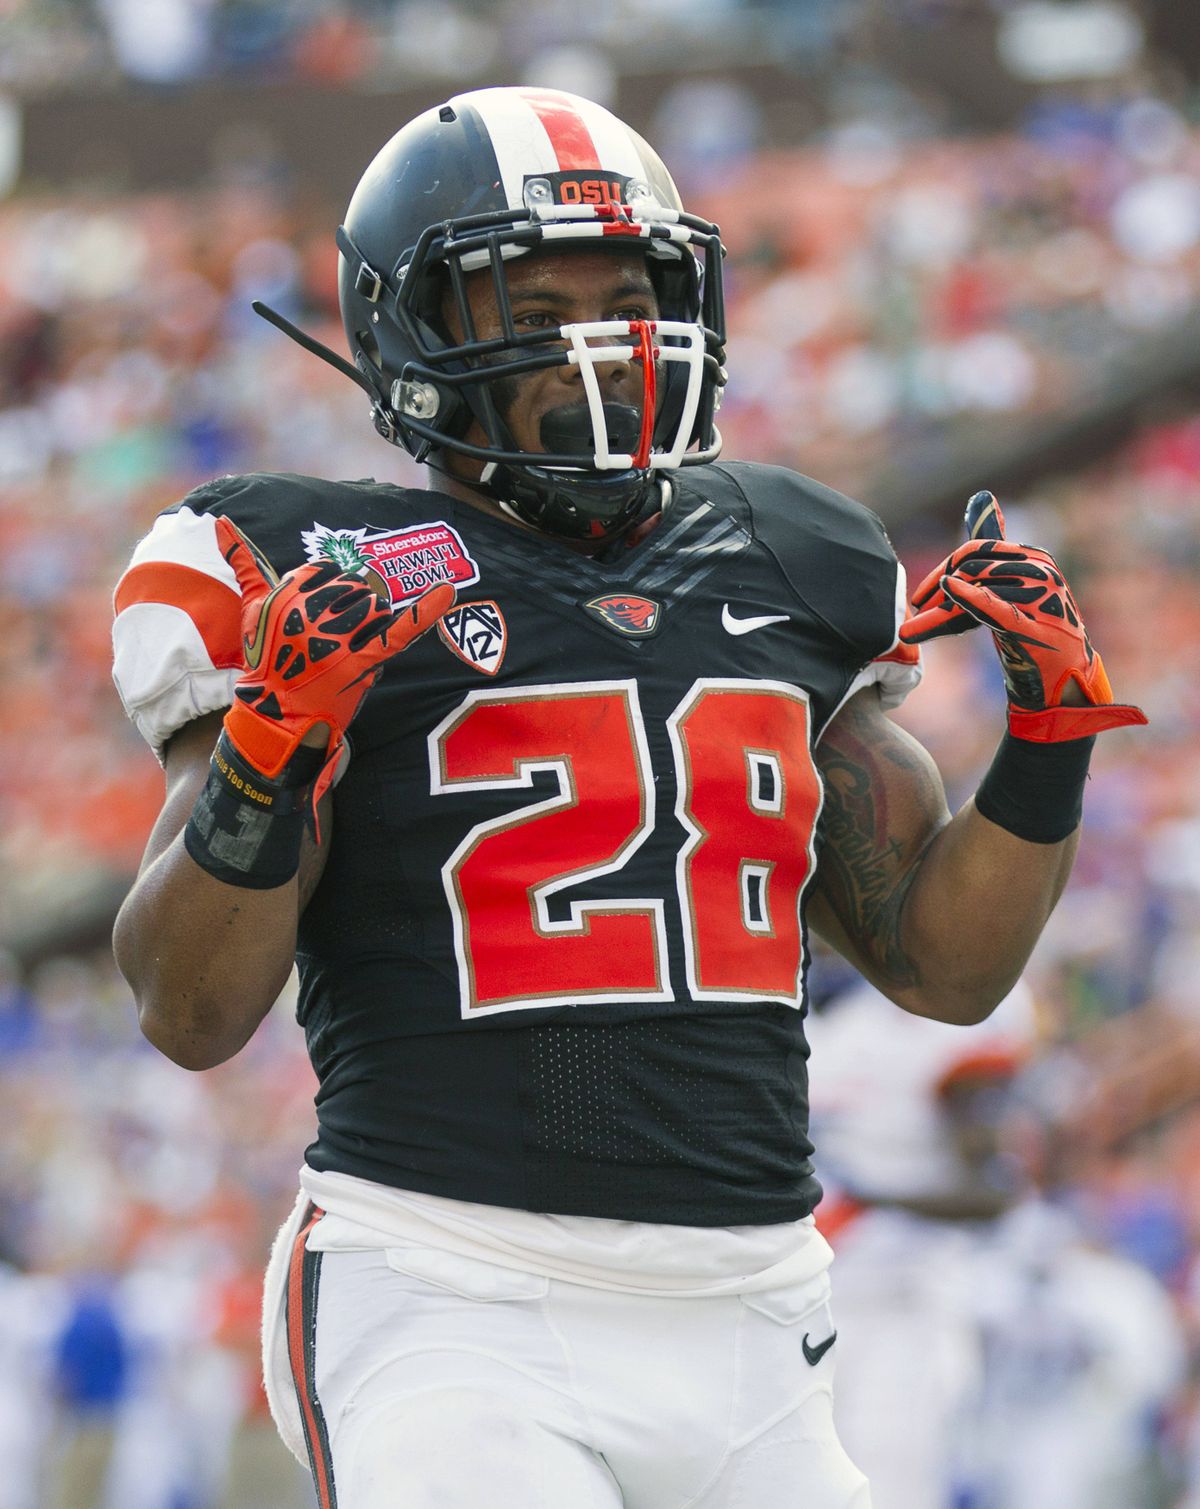 Oregon State running back Terron Ward celebrates after his second-quarter touchdown Tuesday in the Hawaii Bowl. (Associated Press)